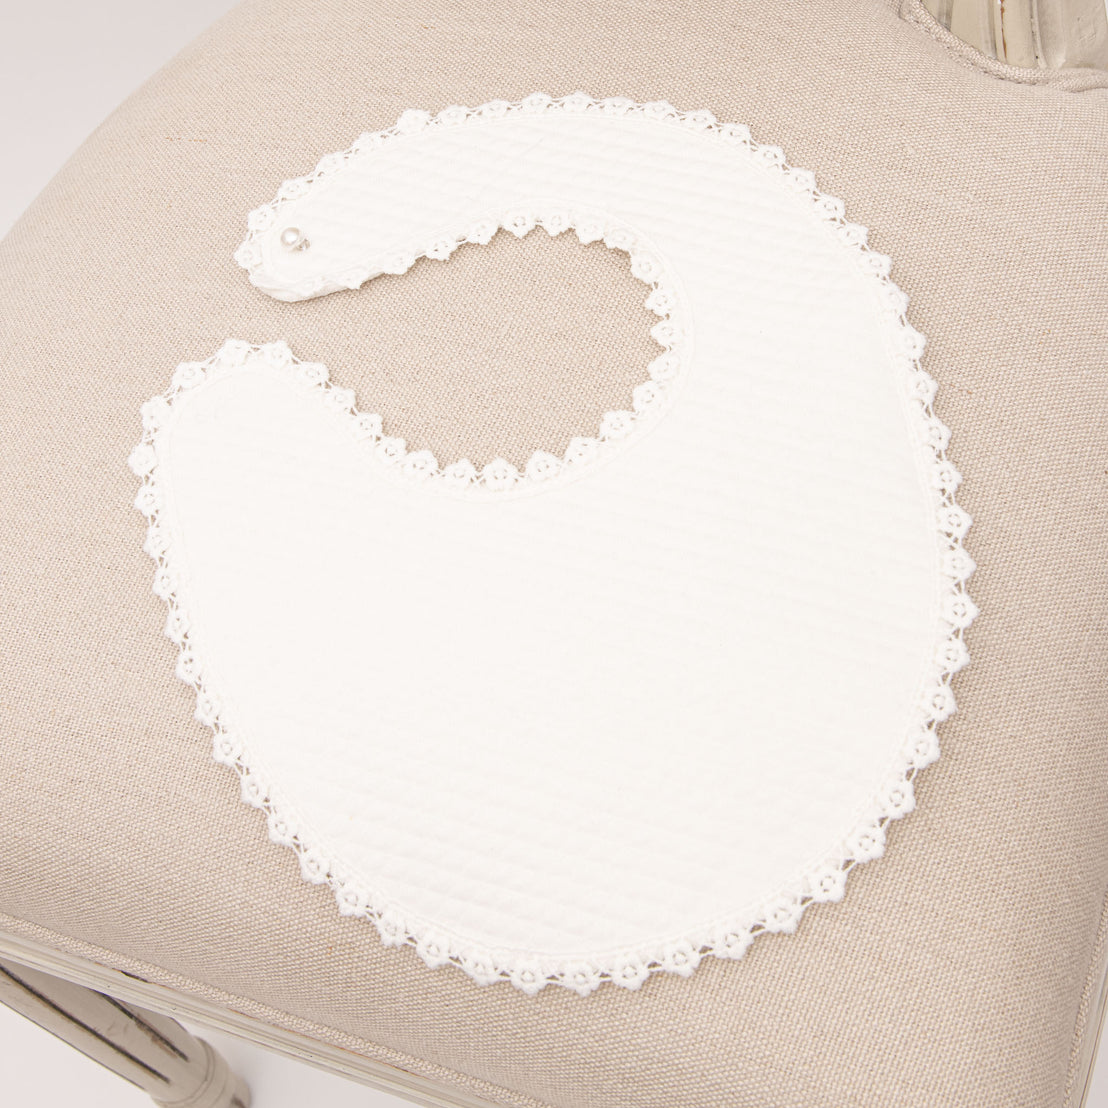 An upscale, Rose Accessory  bib with lace trim is on a beige fabric surface, close-up view.